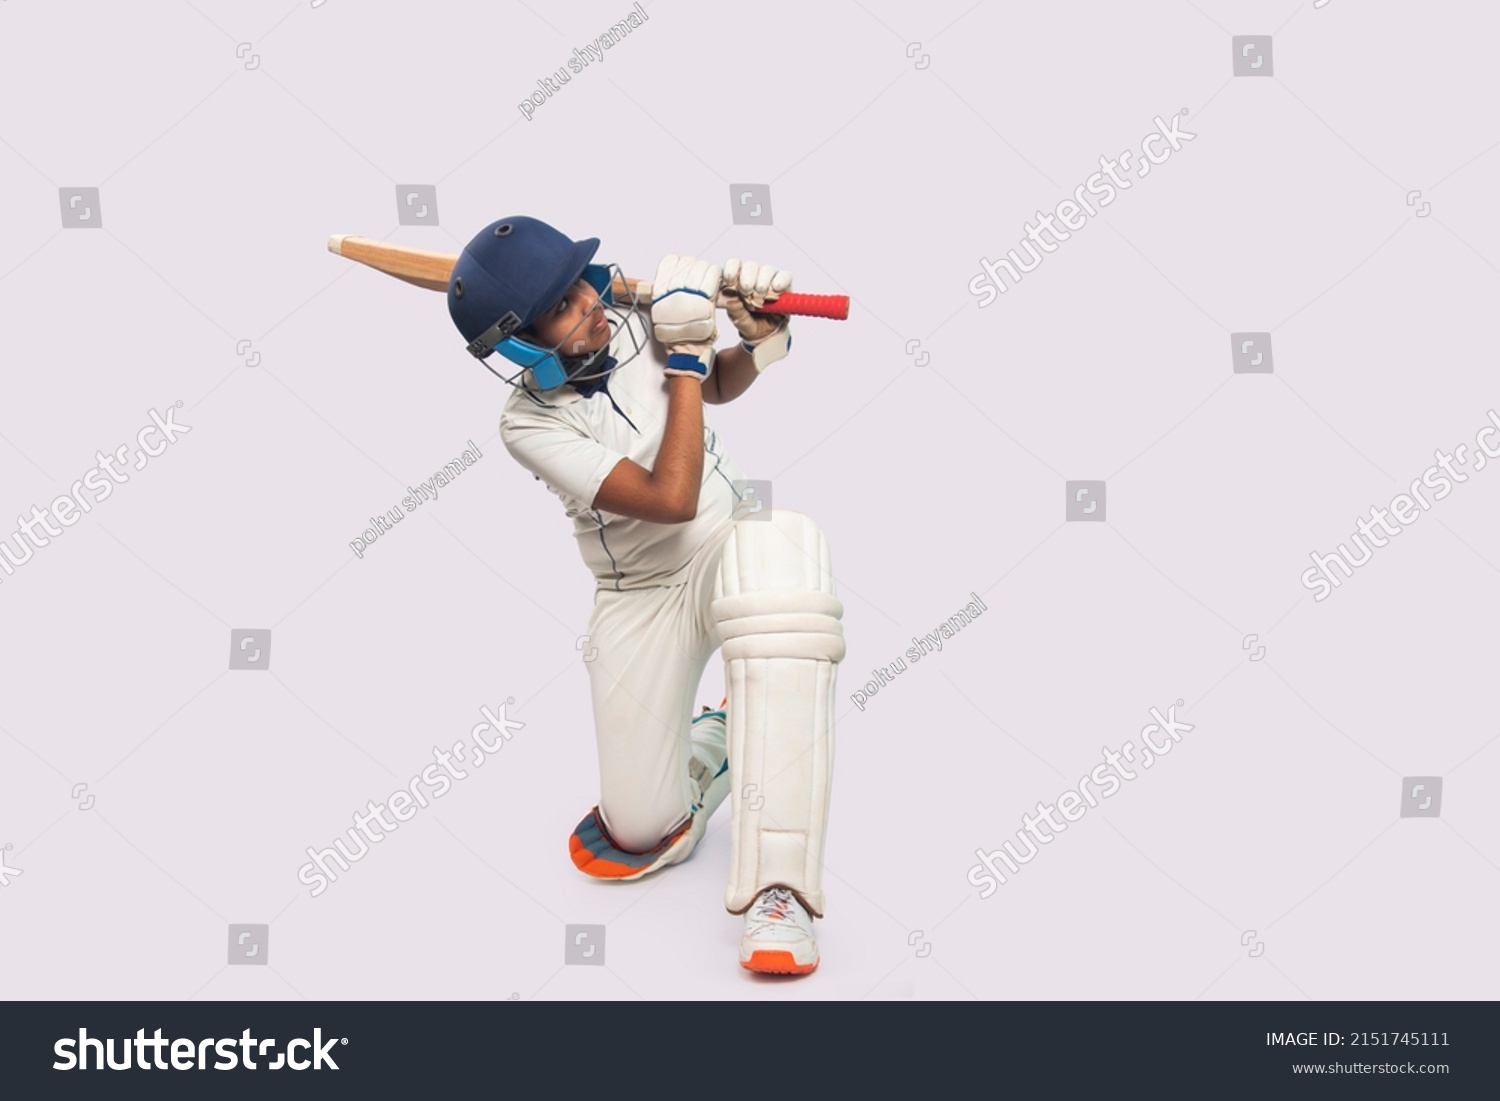 Portrait of boy hitting a shot During a Cricket Game #2151745111